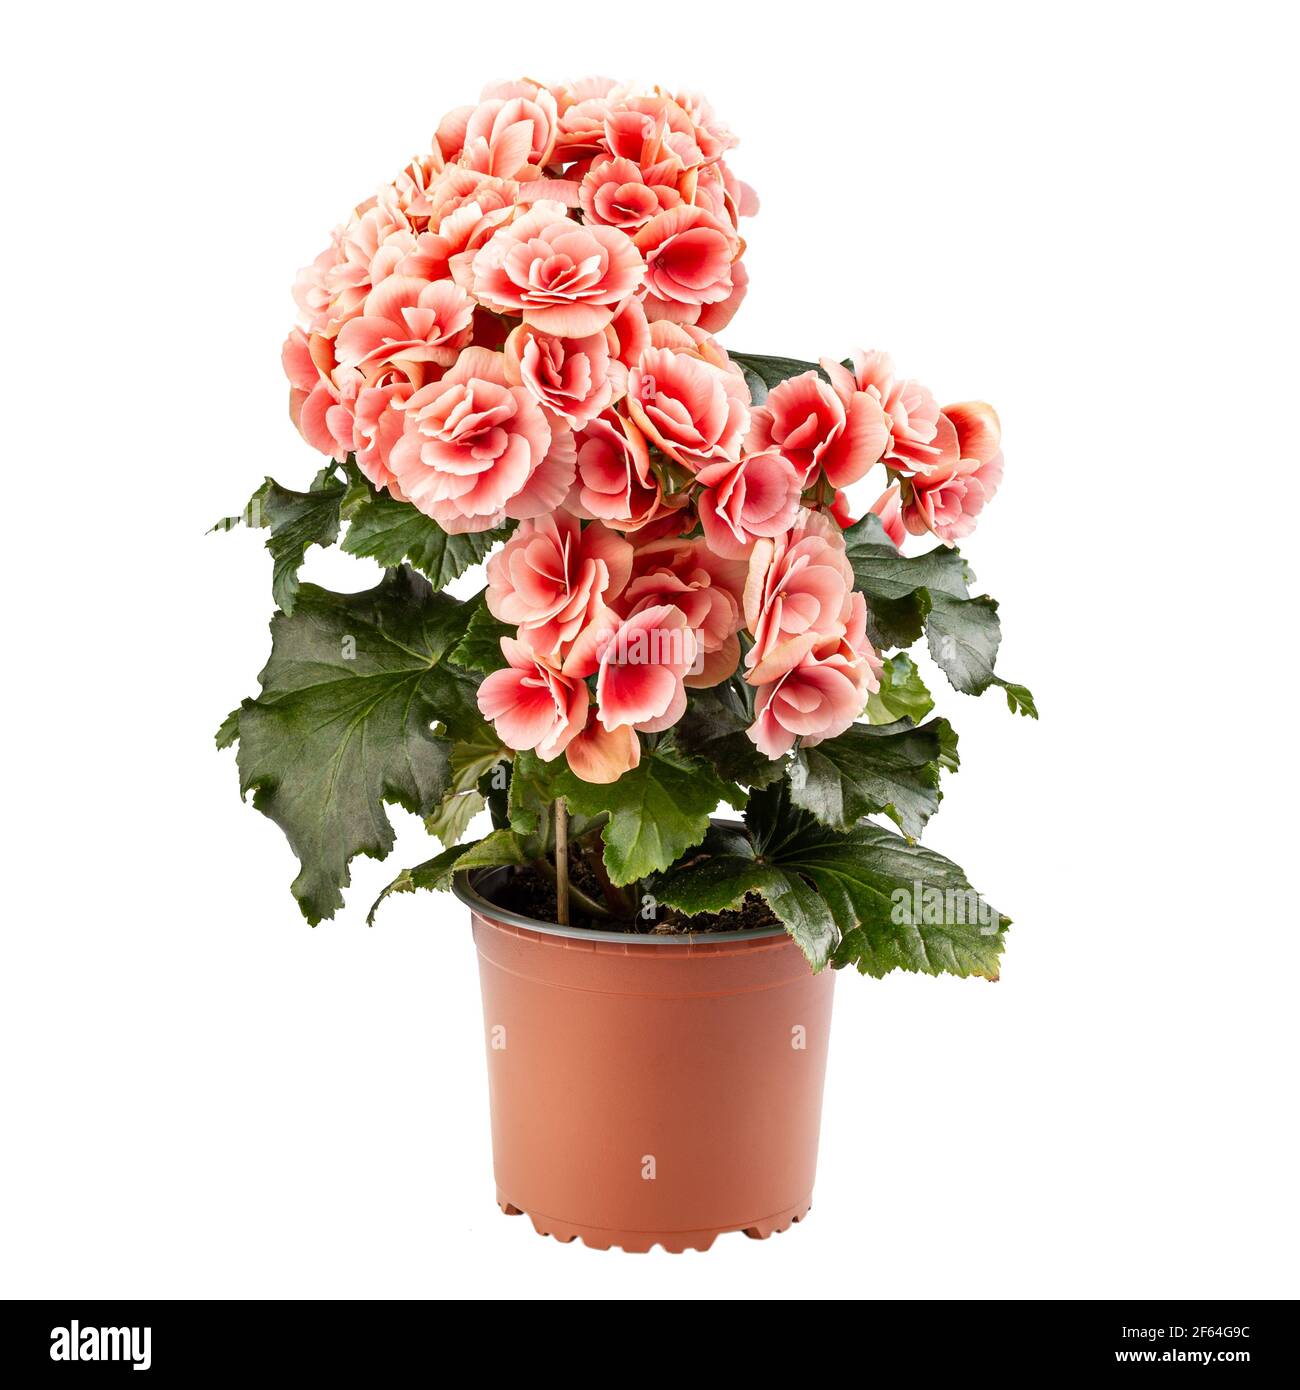 Elatior Begonias the perfect indoor plant in brown flower pot on white background Stock Photo